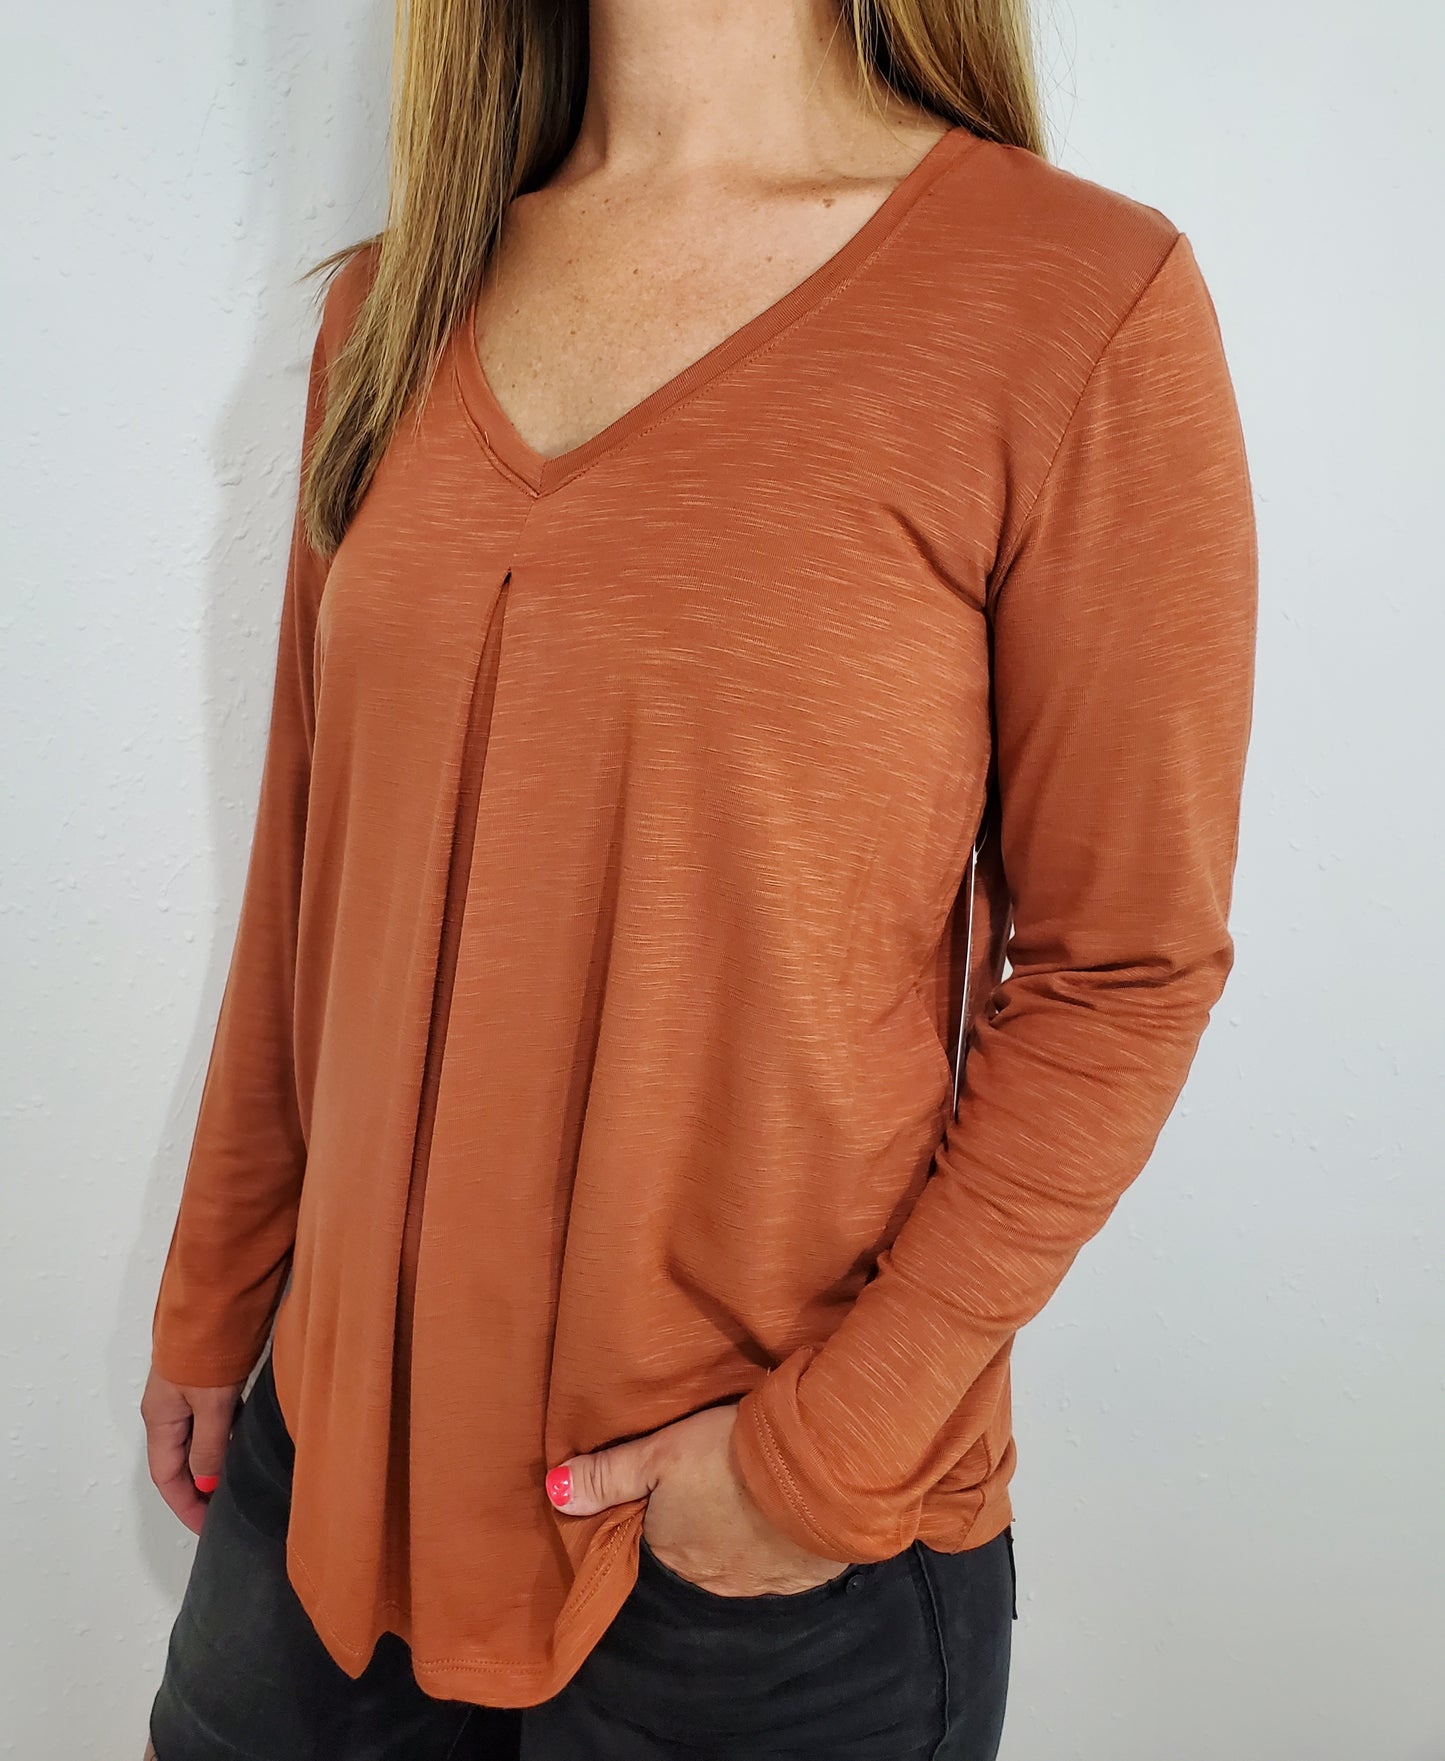 TRIBAL V NECK PLEAT TOP - BAKED CLAY